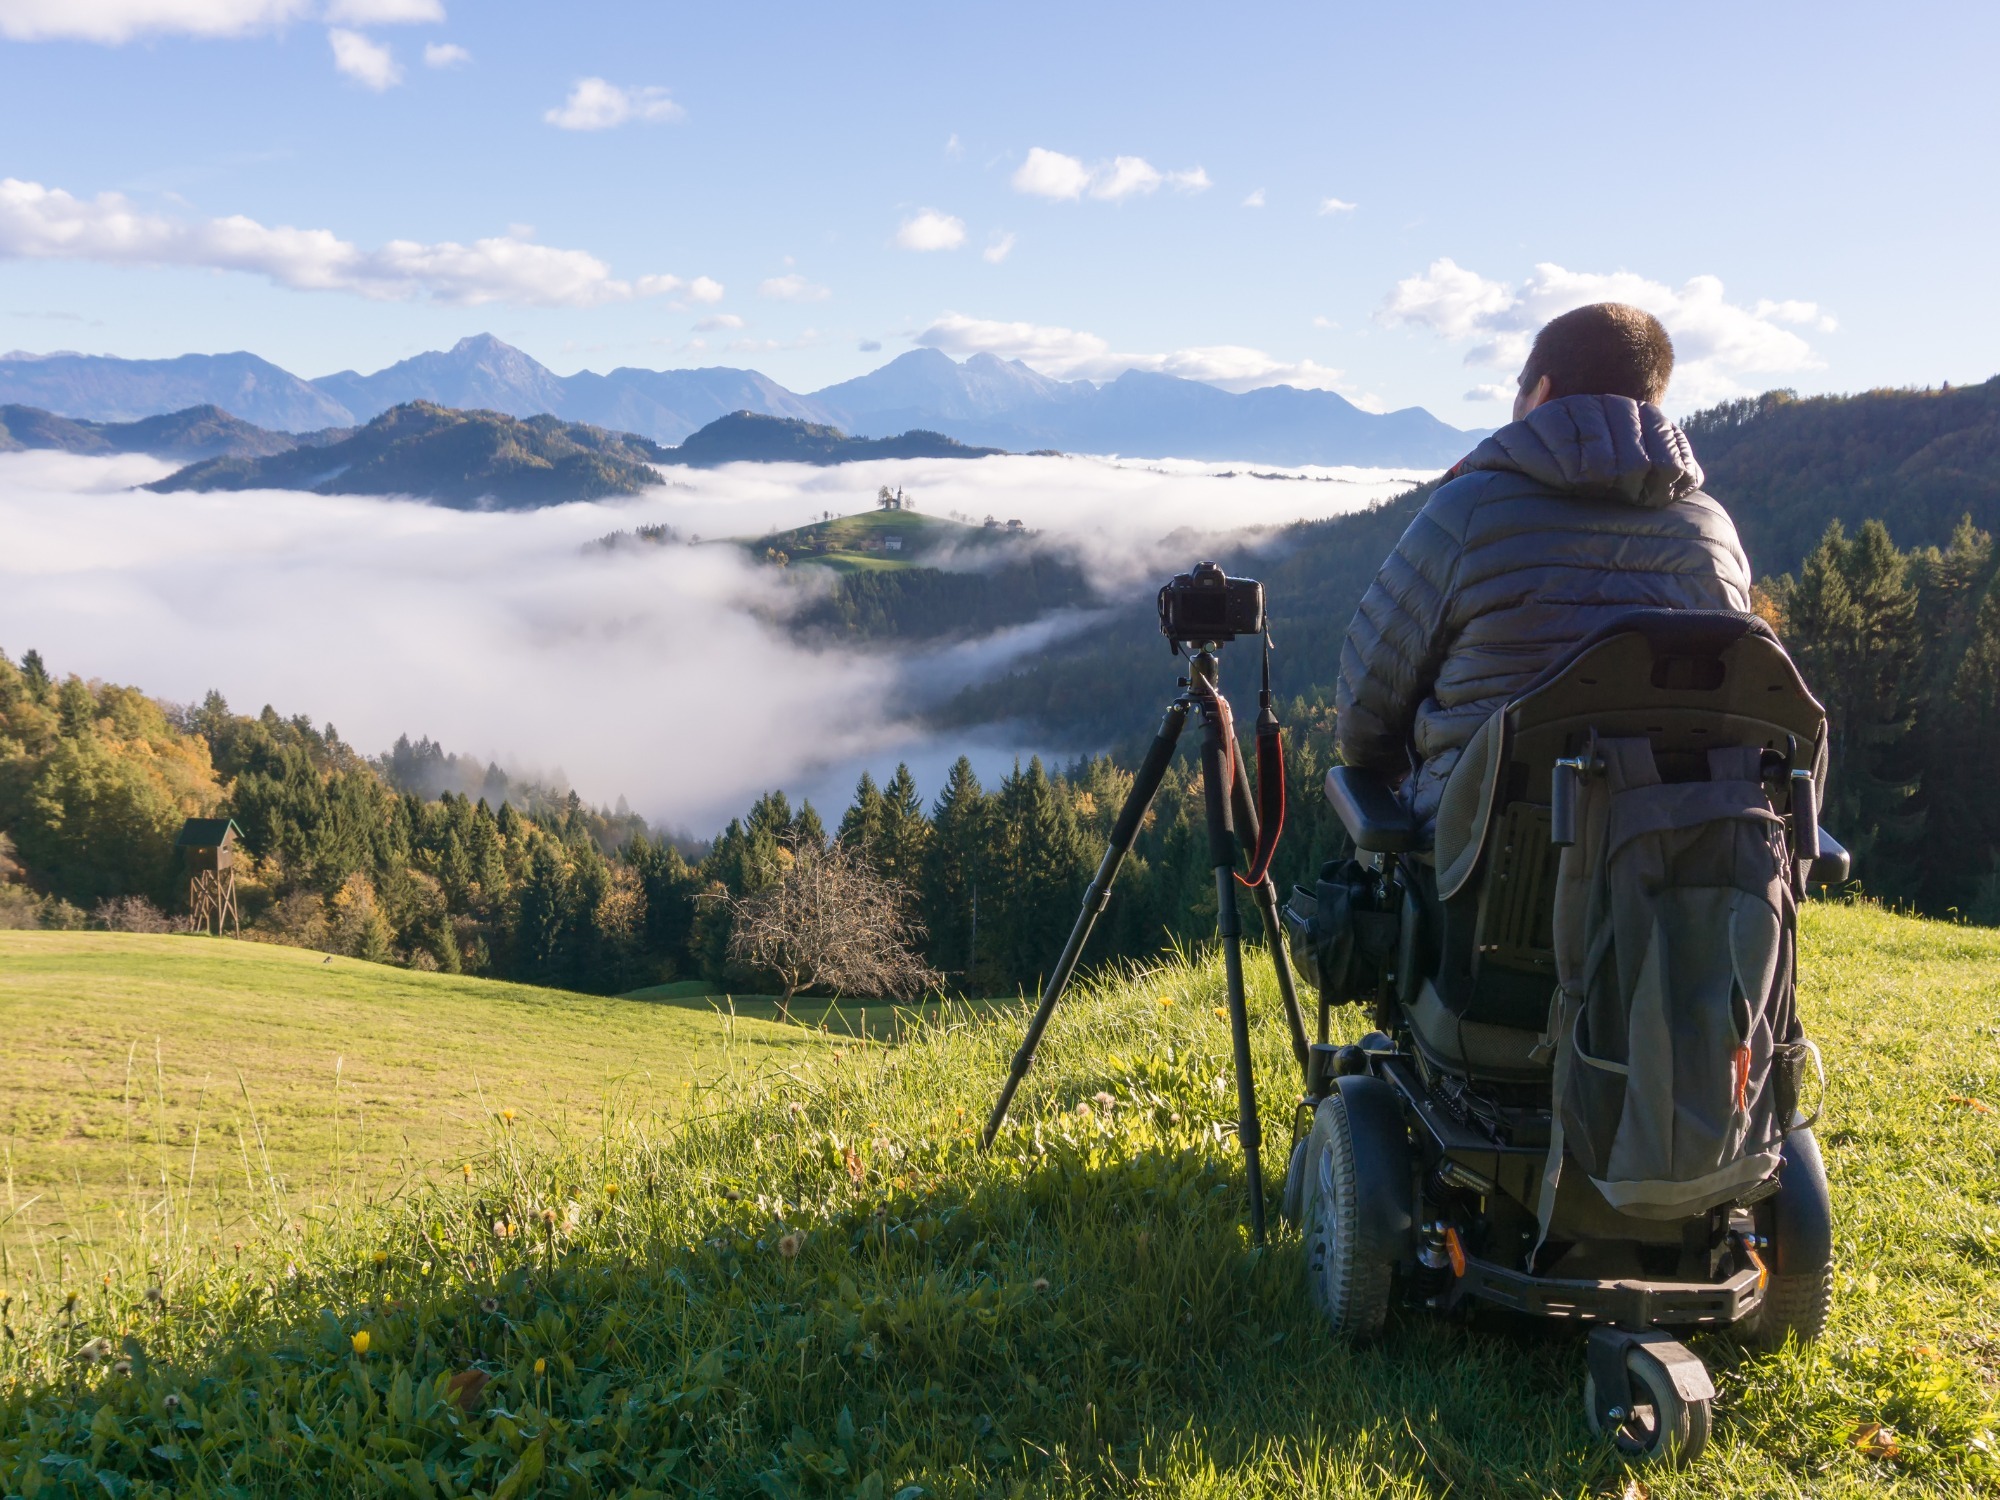 https://www.agedcareguide.com.au/assets/news/articles/man-on-wheelchair-taking-photos-of-beautiful-landscape-in-a-foggy-st-picture-id1124687034.jpg